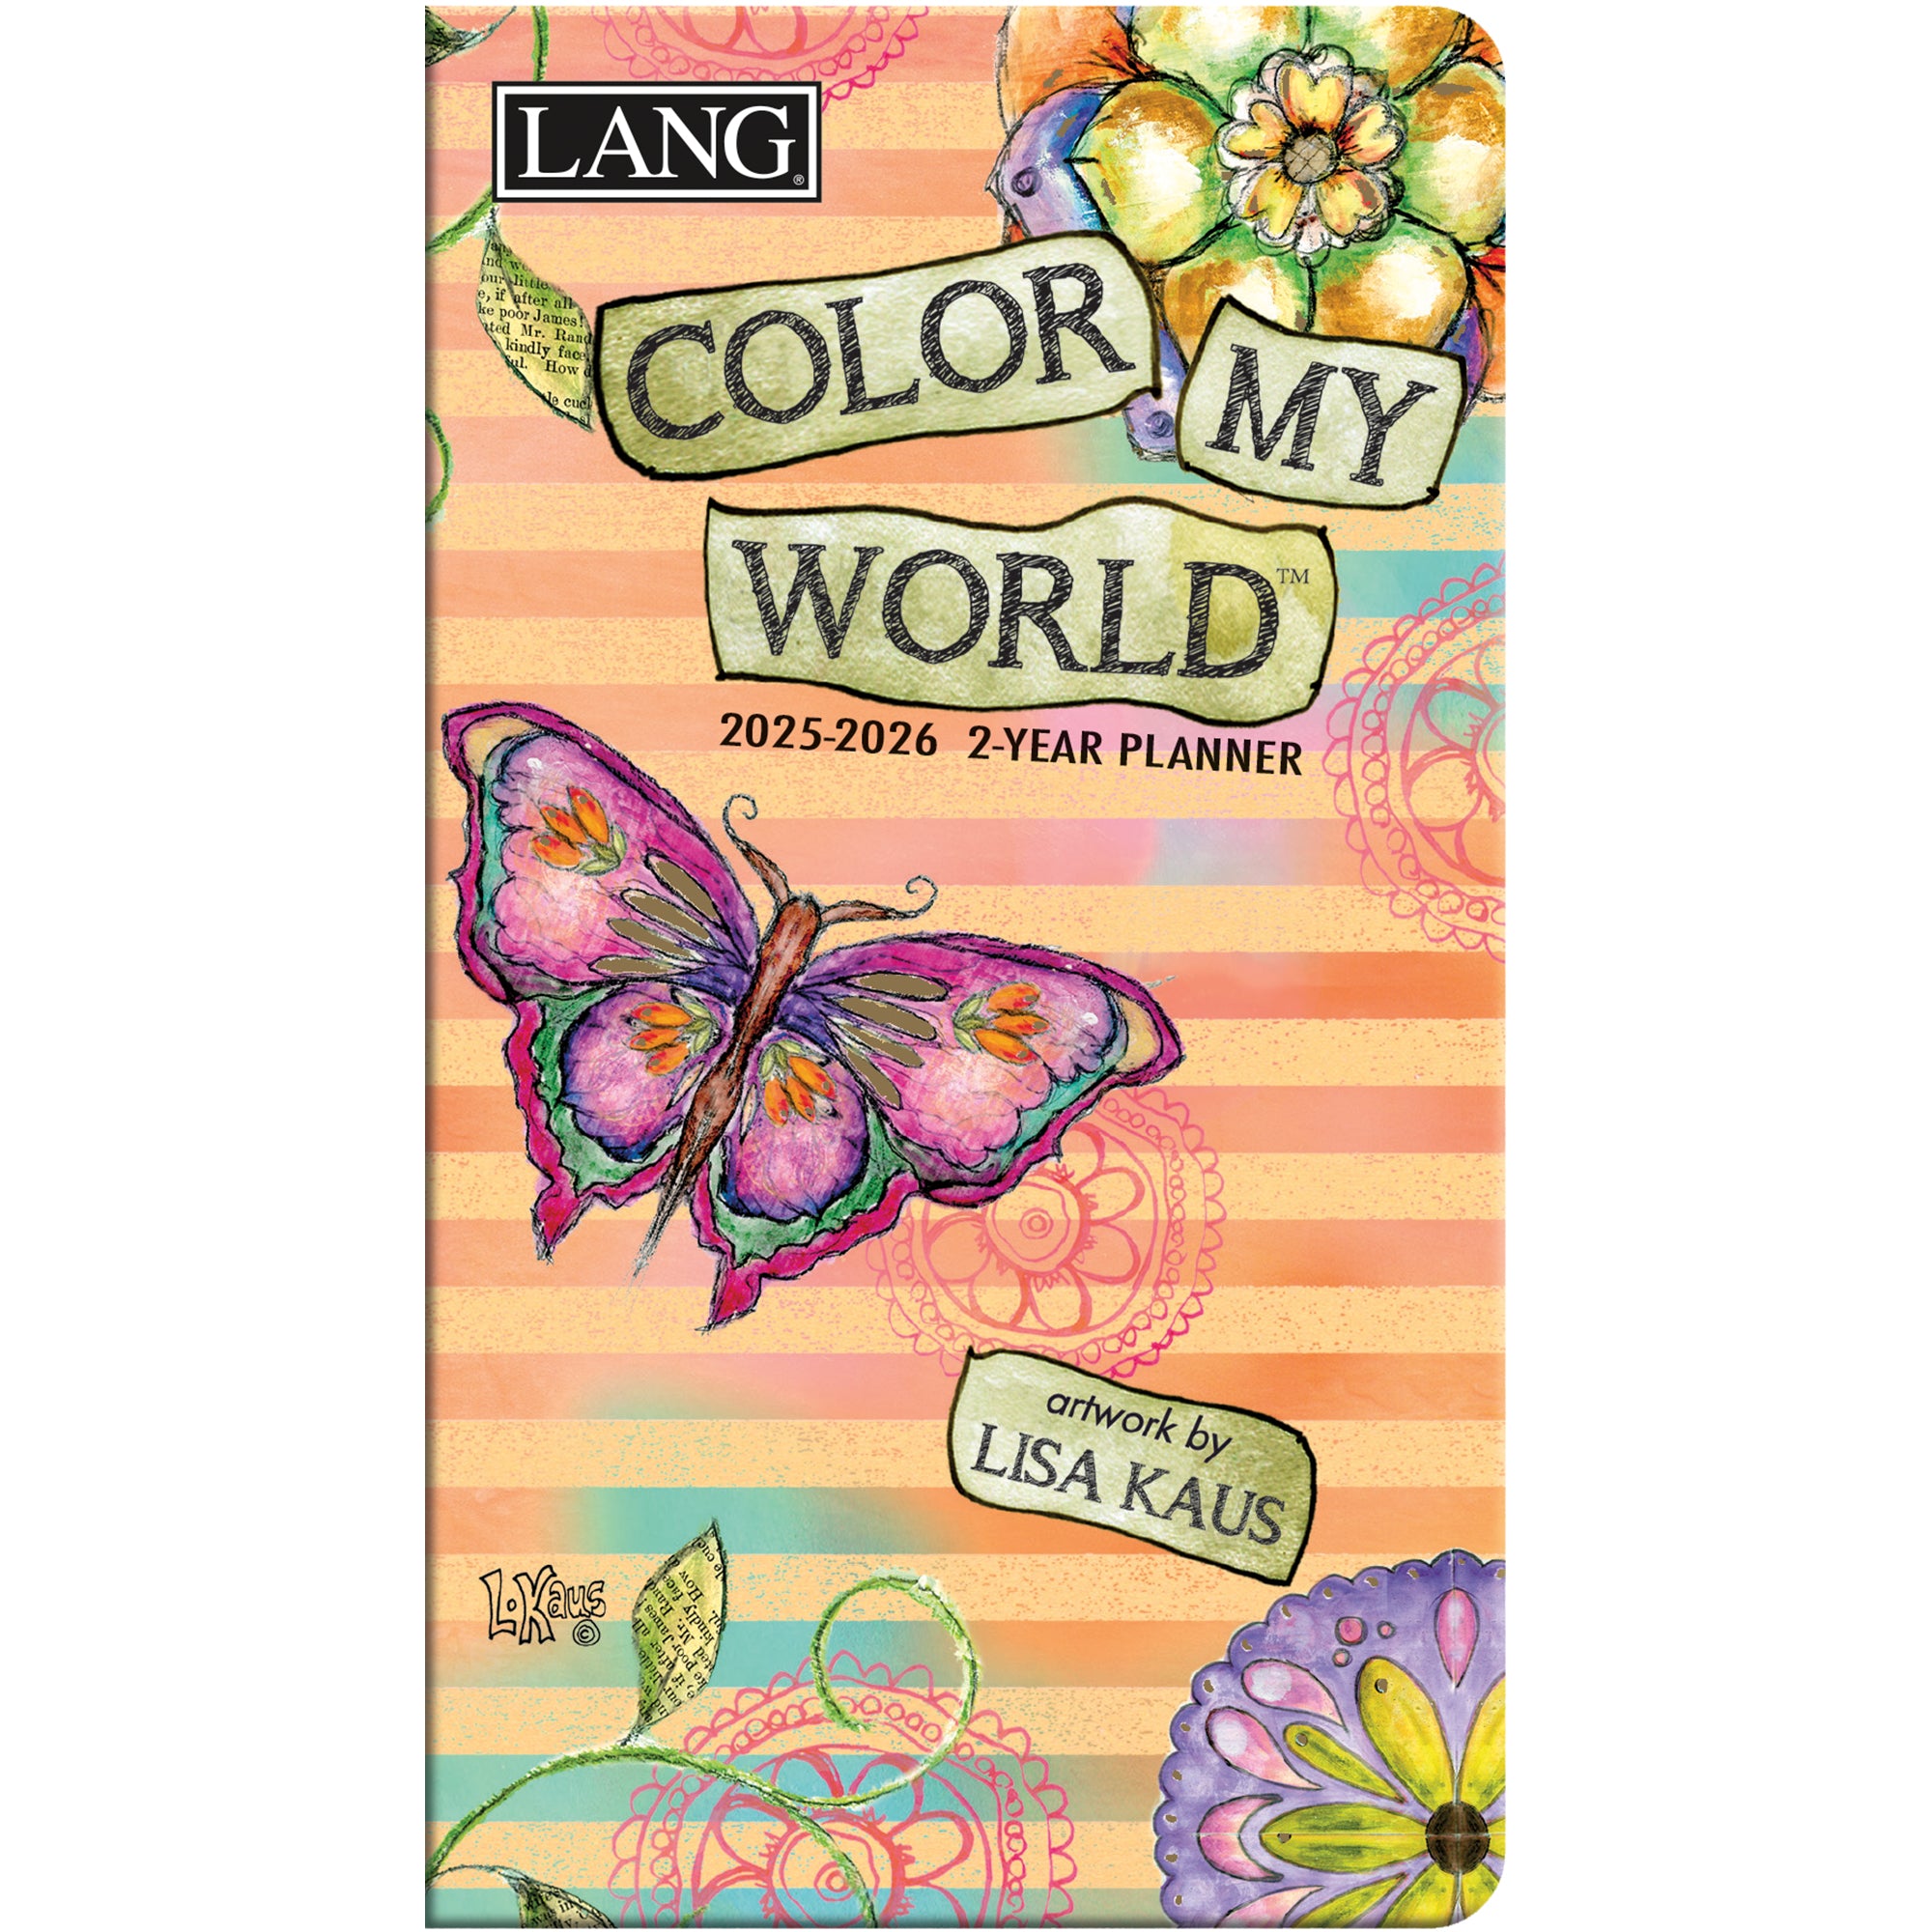 2025-2026 Color My World - LANG 2 Year Pocket Diary/Planner